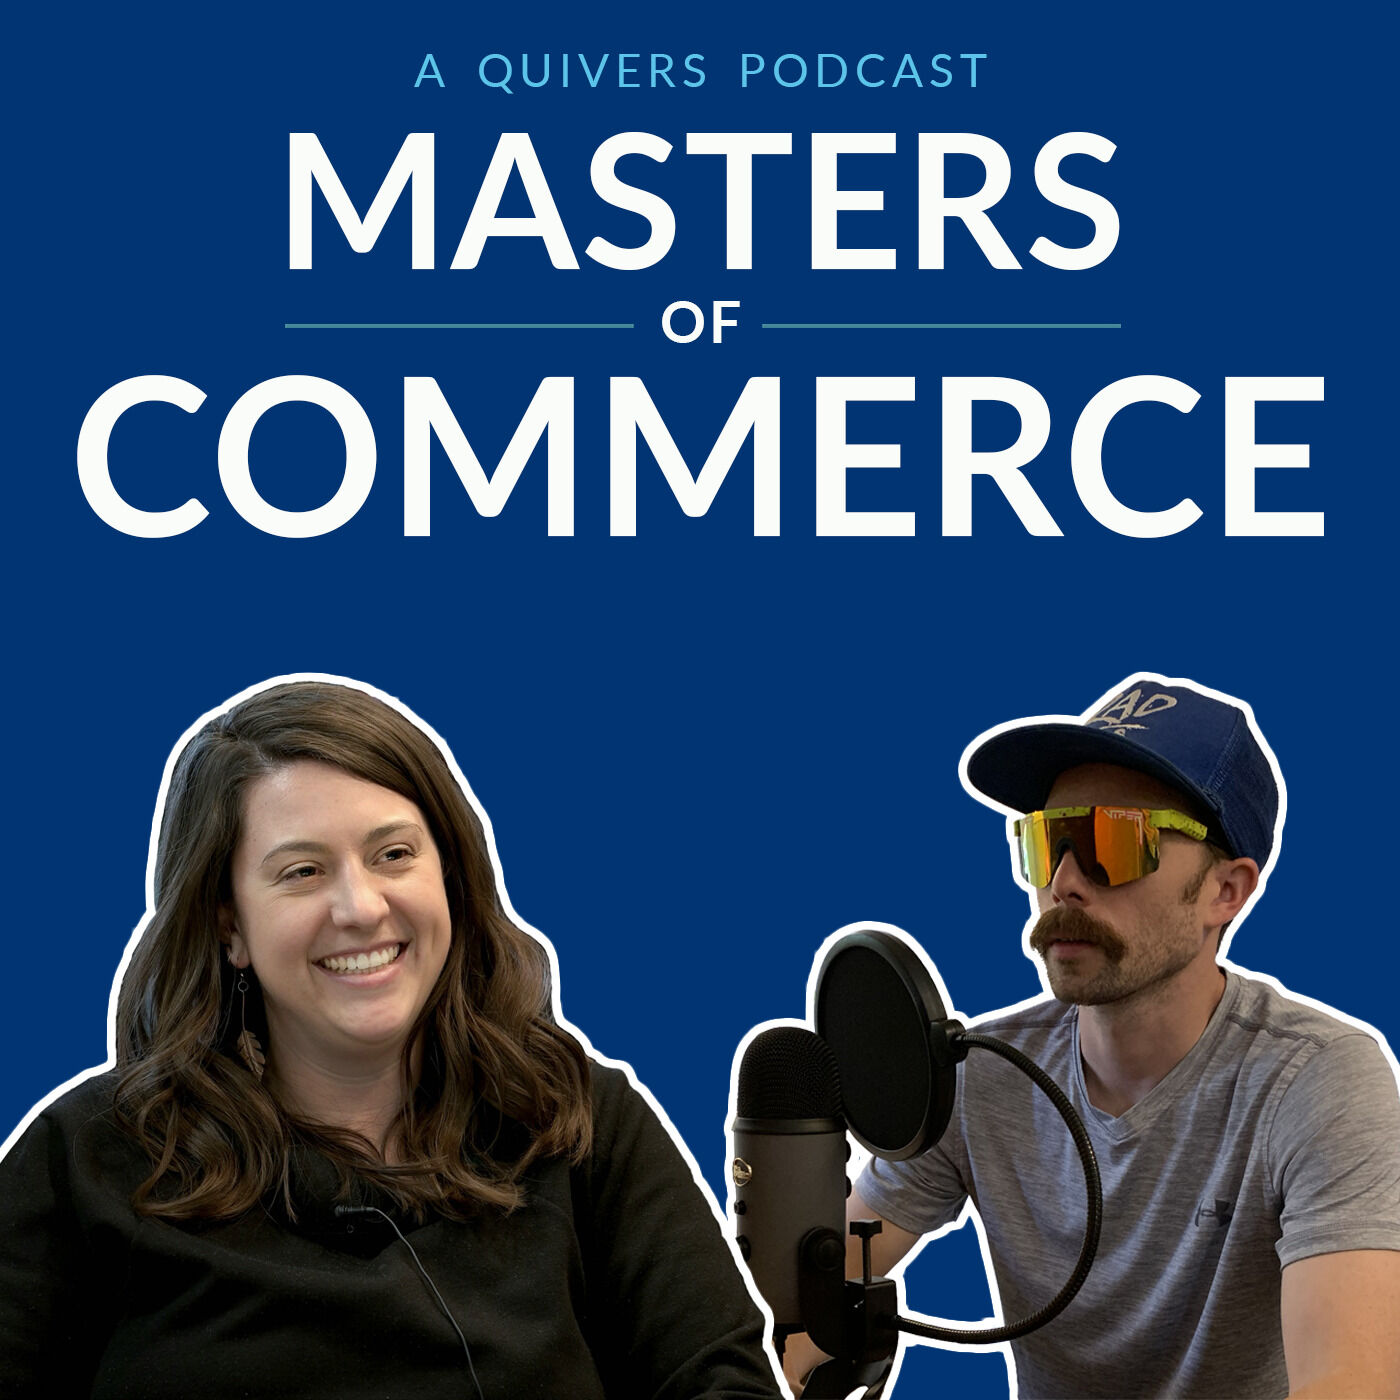 Masters of Commerce, Episode 4: ”BOPIS Is Here to Stay” featuring Julie Swinson of Powder House Ski Shops